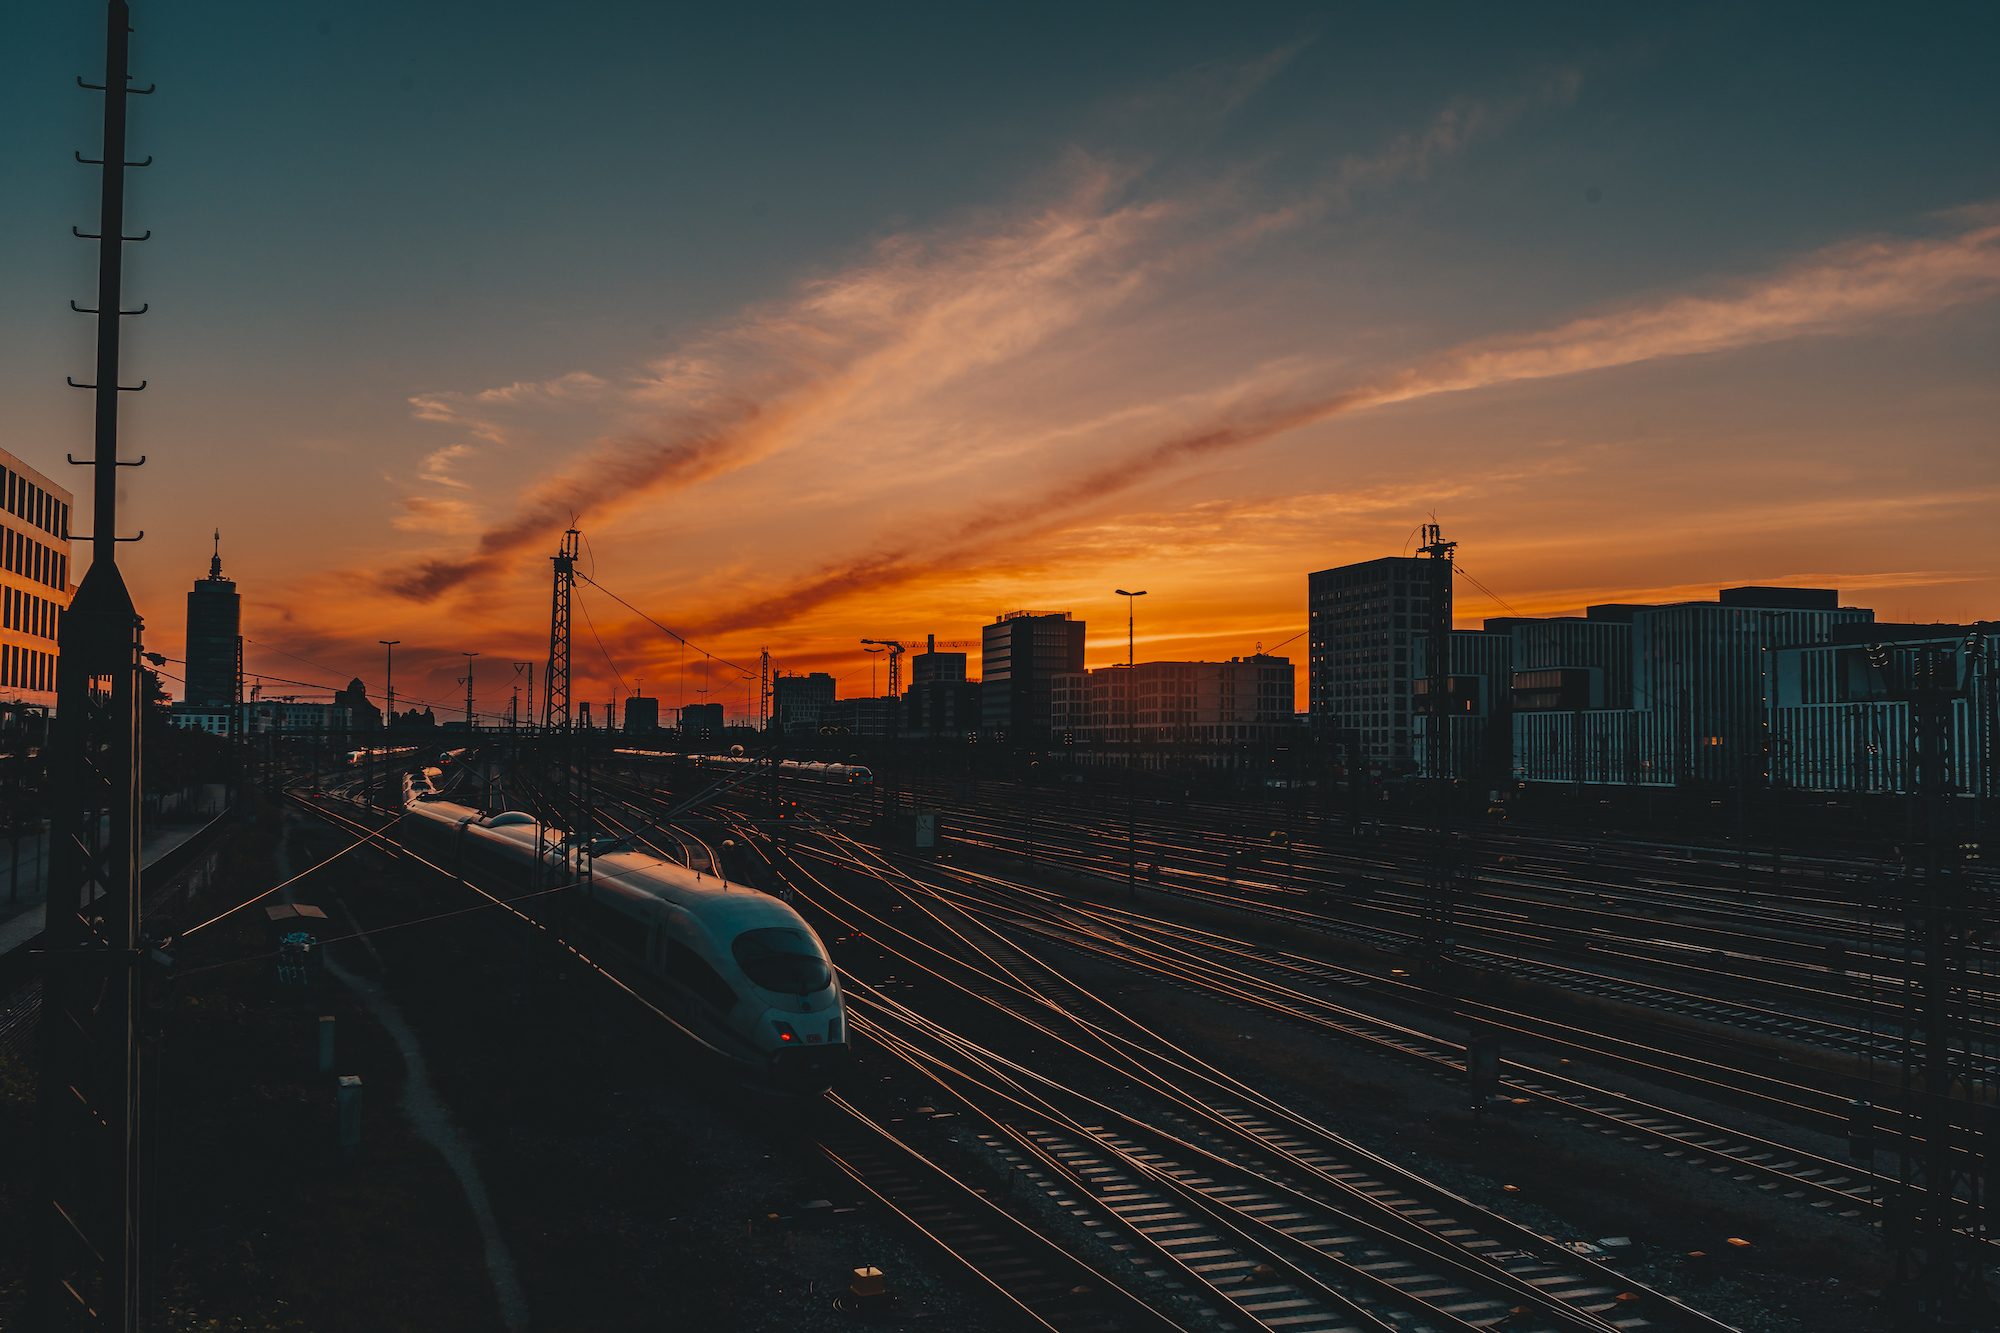 Panoramic-View-Of-Railroad-Tracks-By-Buildings-Against-Sky-During-Sunset_GettyimagesFrederik-Fernow-EyeEm